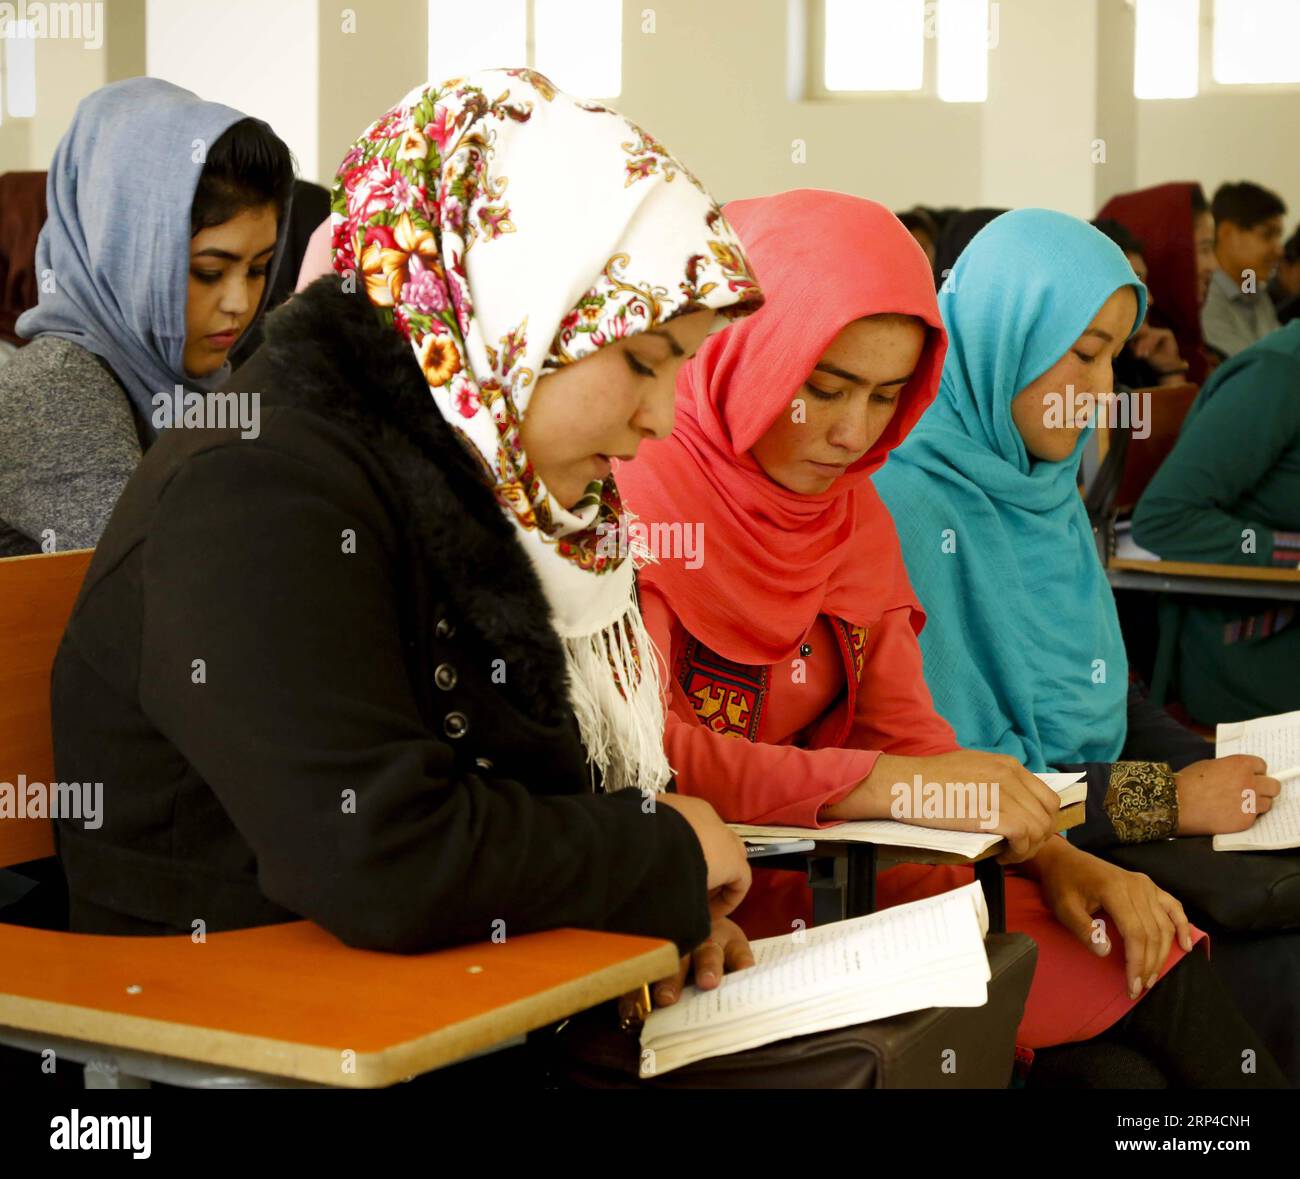 (181104) -- BAMIYAN, Nov. 4, 2018 -- University students attend a class at Bamiyan University in Bamiyan province, central Afghanistan, Nov. 4, 2018. Established around two decades ago, but shut down by the Taliban outfit in 1997, after the armed outfit overran Bamiyan province, Bamiyan University was reopened in 2003 and since then has been serving as the main higher educational center in the highland region of Afghanistan. TO GO WITH Feature: More girls enroll in university in Afghanistan s Bamiyan province, post-grad job situation remains tight )(psw) AFGHANISTAN-BAMIYAN-GIRLS-EDUCATION Noo Stock Photo